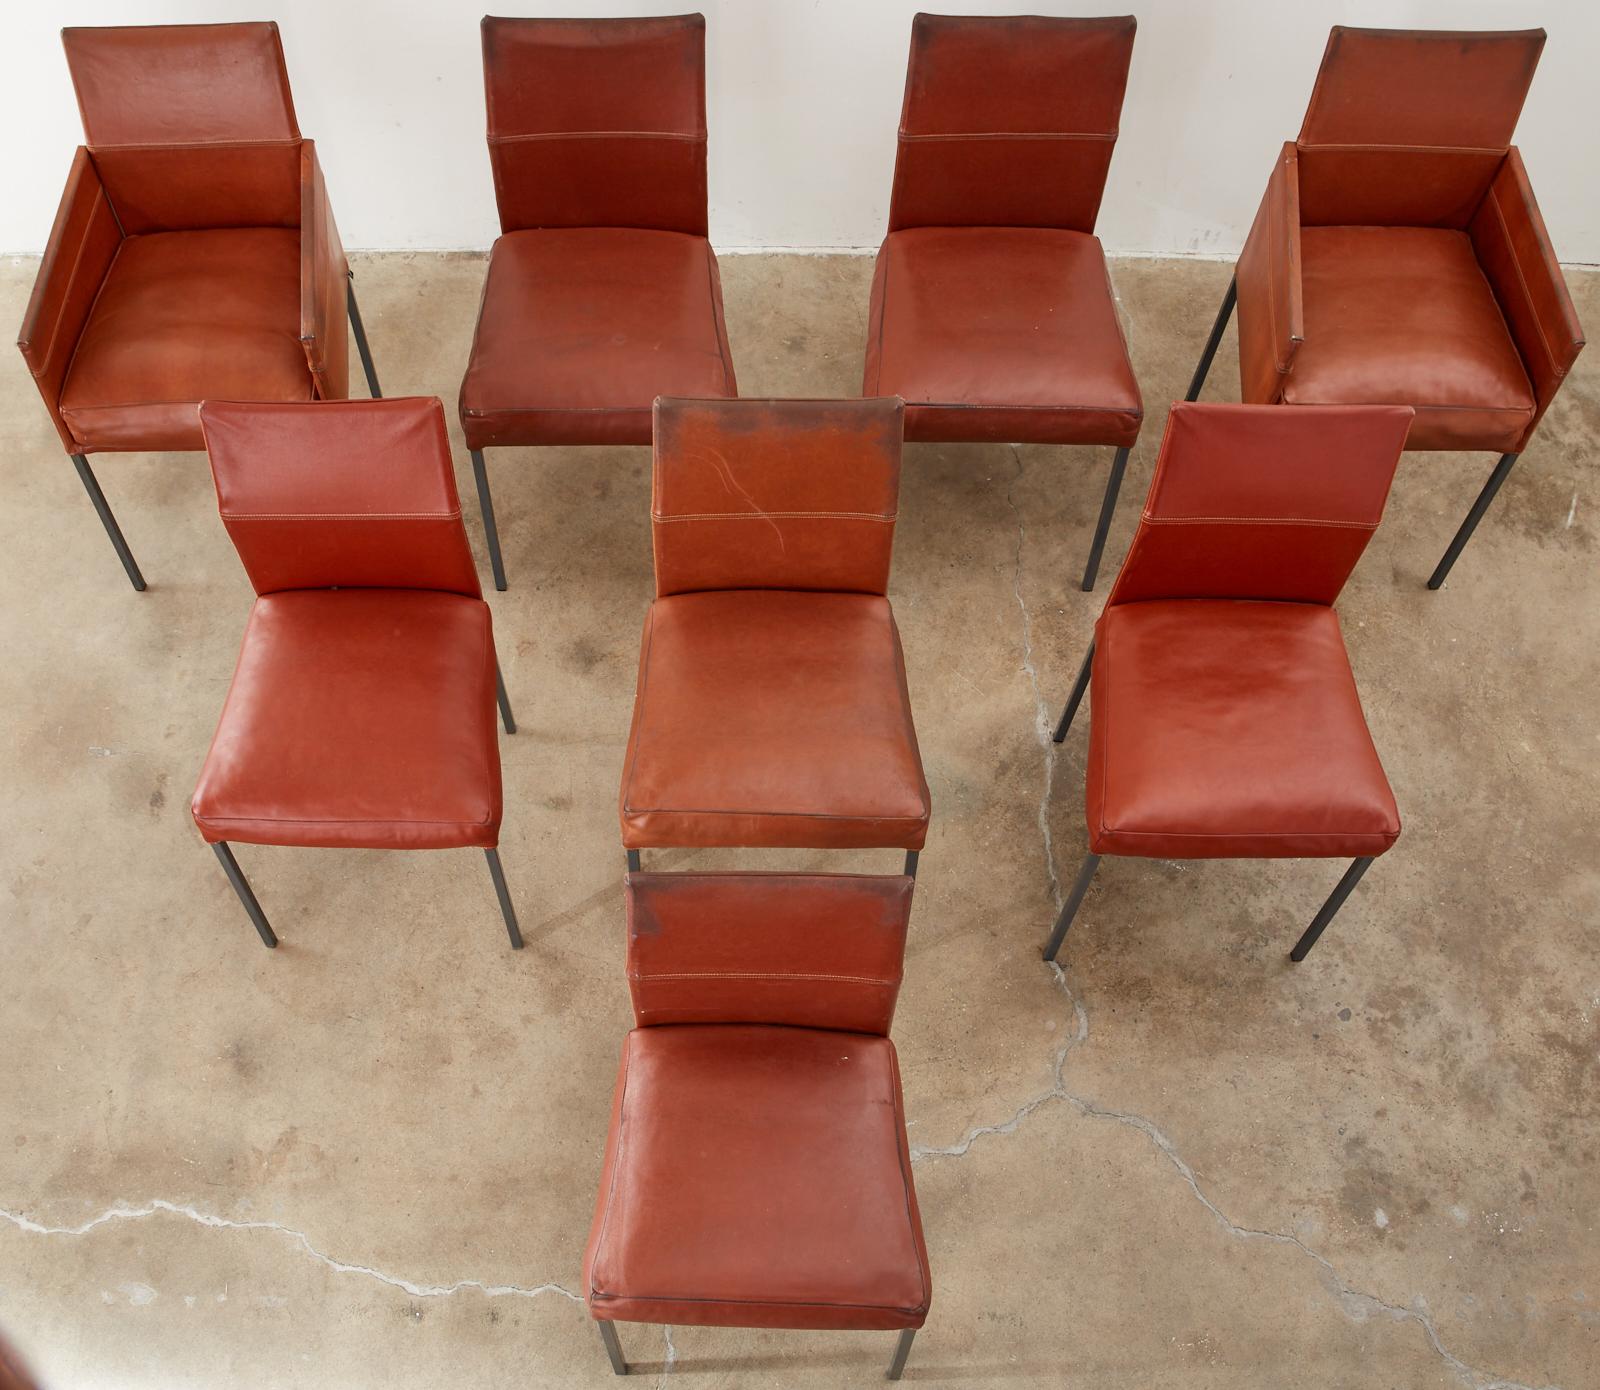 Stylish Postmodern design set of eight German dining chairs by KFF (Karl Friedrich-Forster). The set consists of six side chairs and two armchairs having a 26 inch high arm. Known as the Texas design with an angled back support and soft pillow